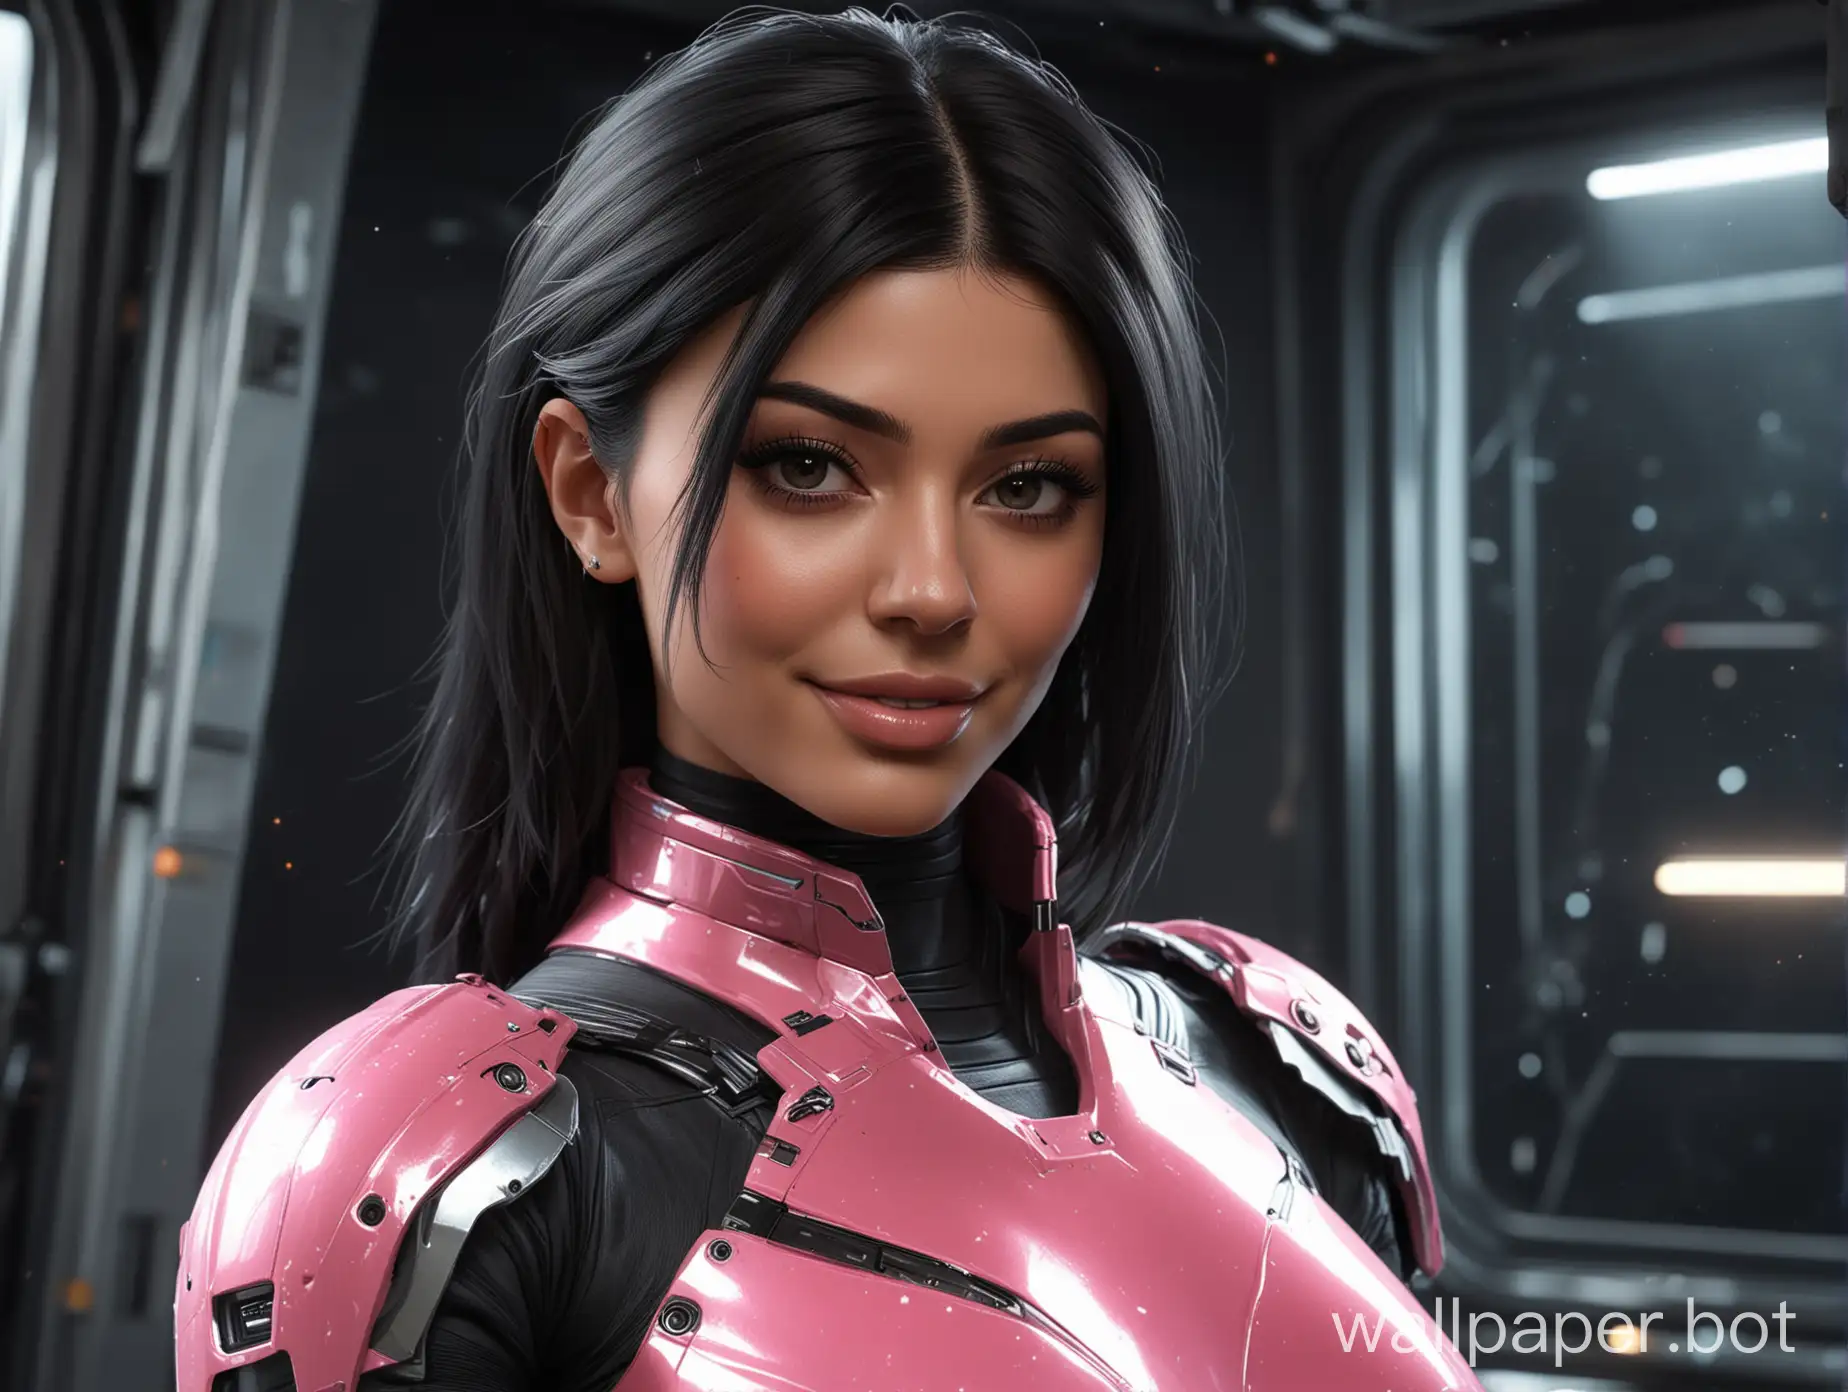 Futuristic-Cyber-Armor-Selfie-Captivating-Kylie-Jenner-Look-in-SciFi-Setting